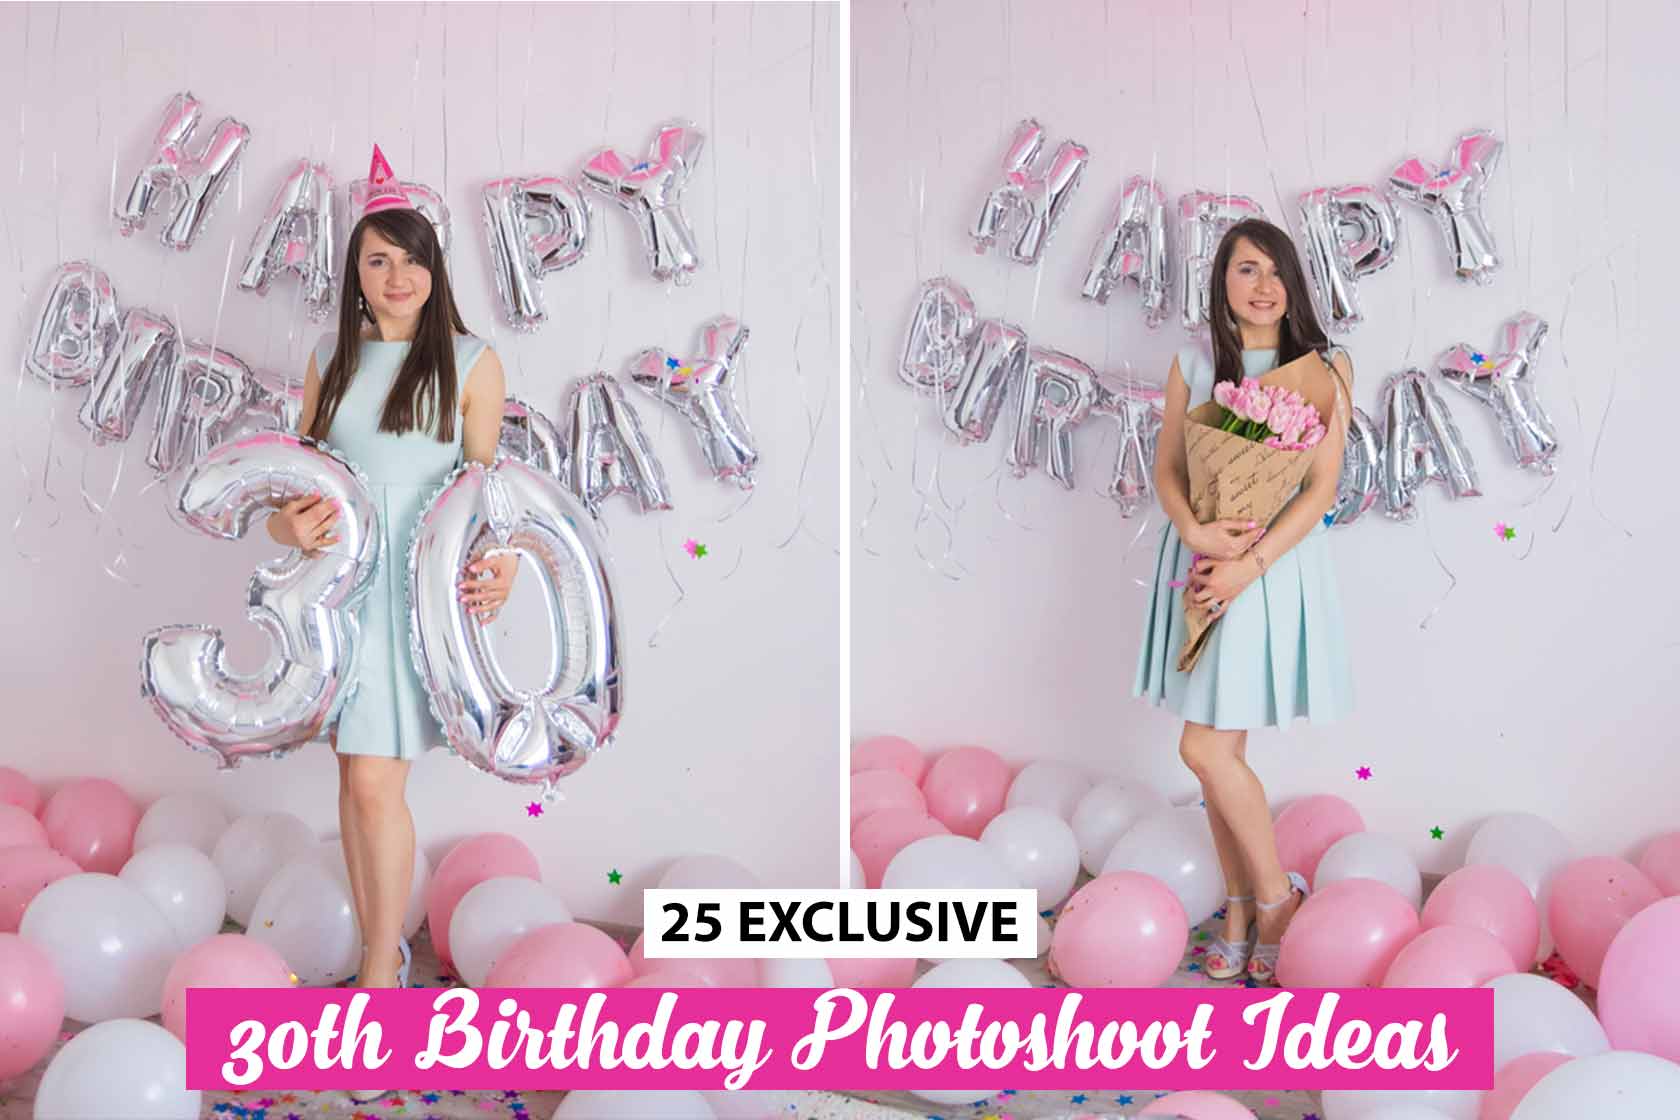 30th Birthday Photoshoot - Adept Clipping Path